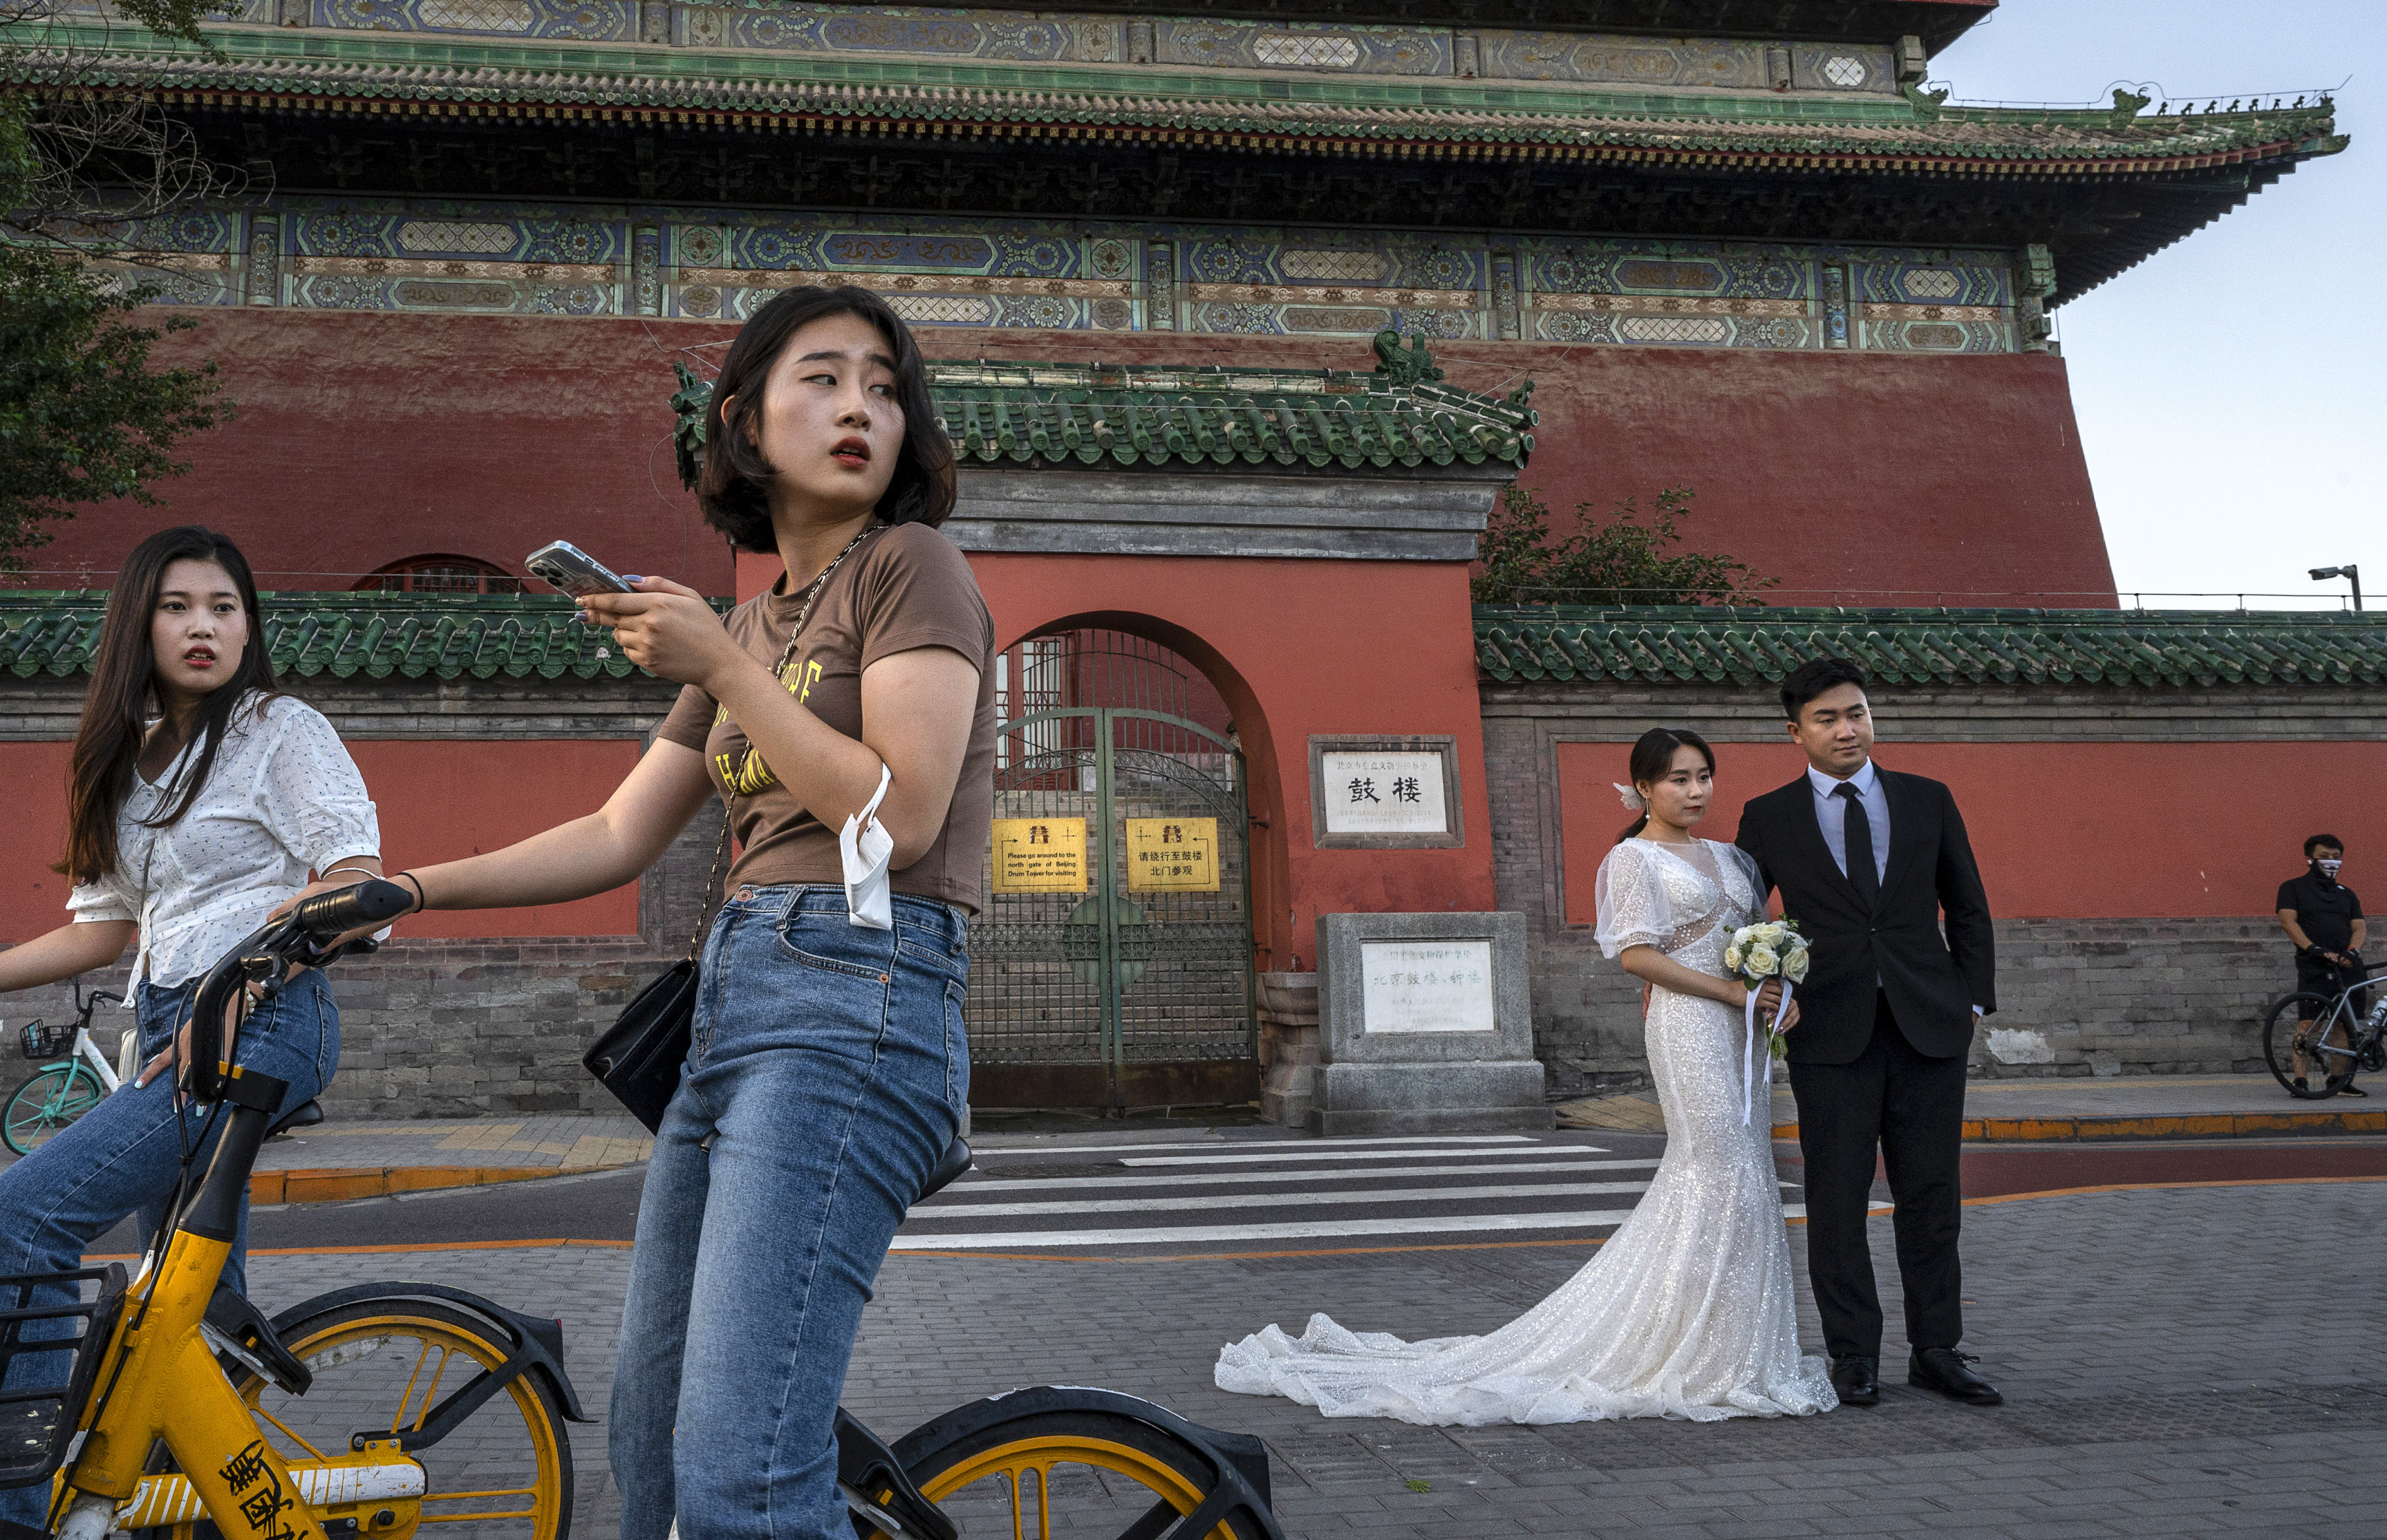 Hotels in the Chinese capital are not allowed to host weddings. Photo: Getty Images